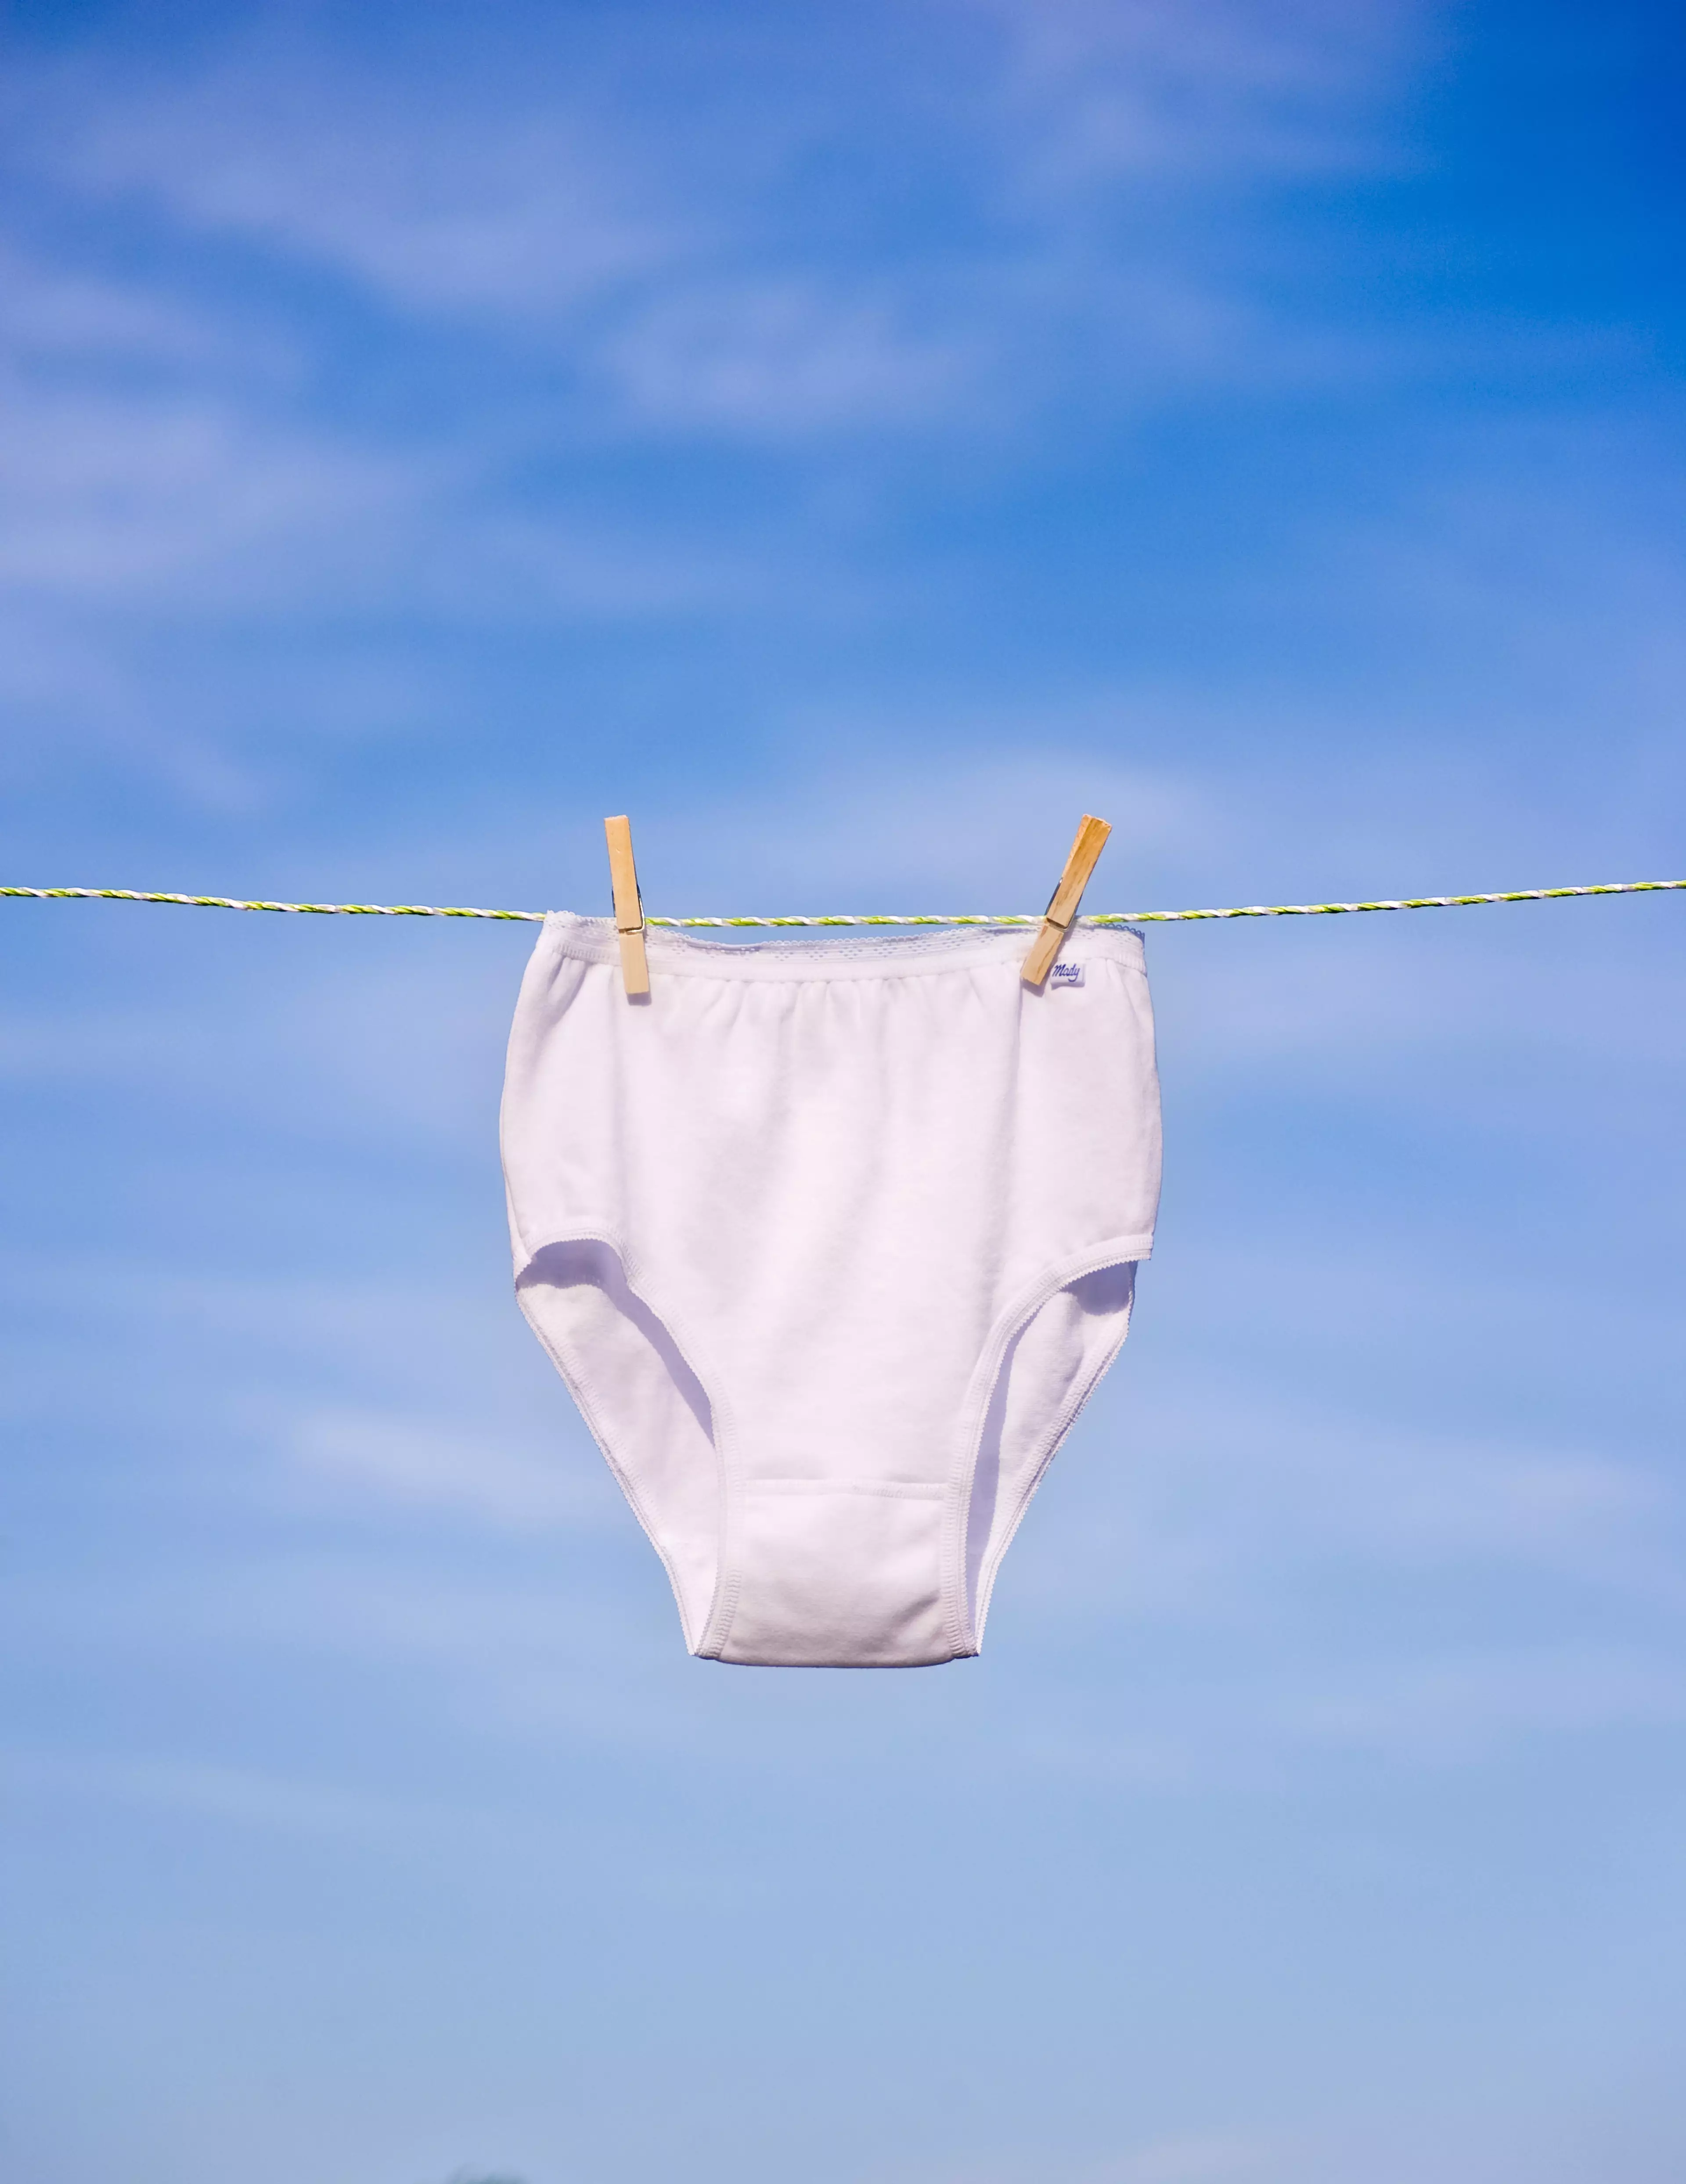 How often should we be throwing away knickers? (